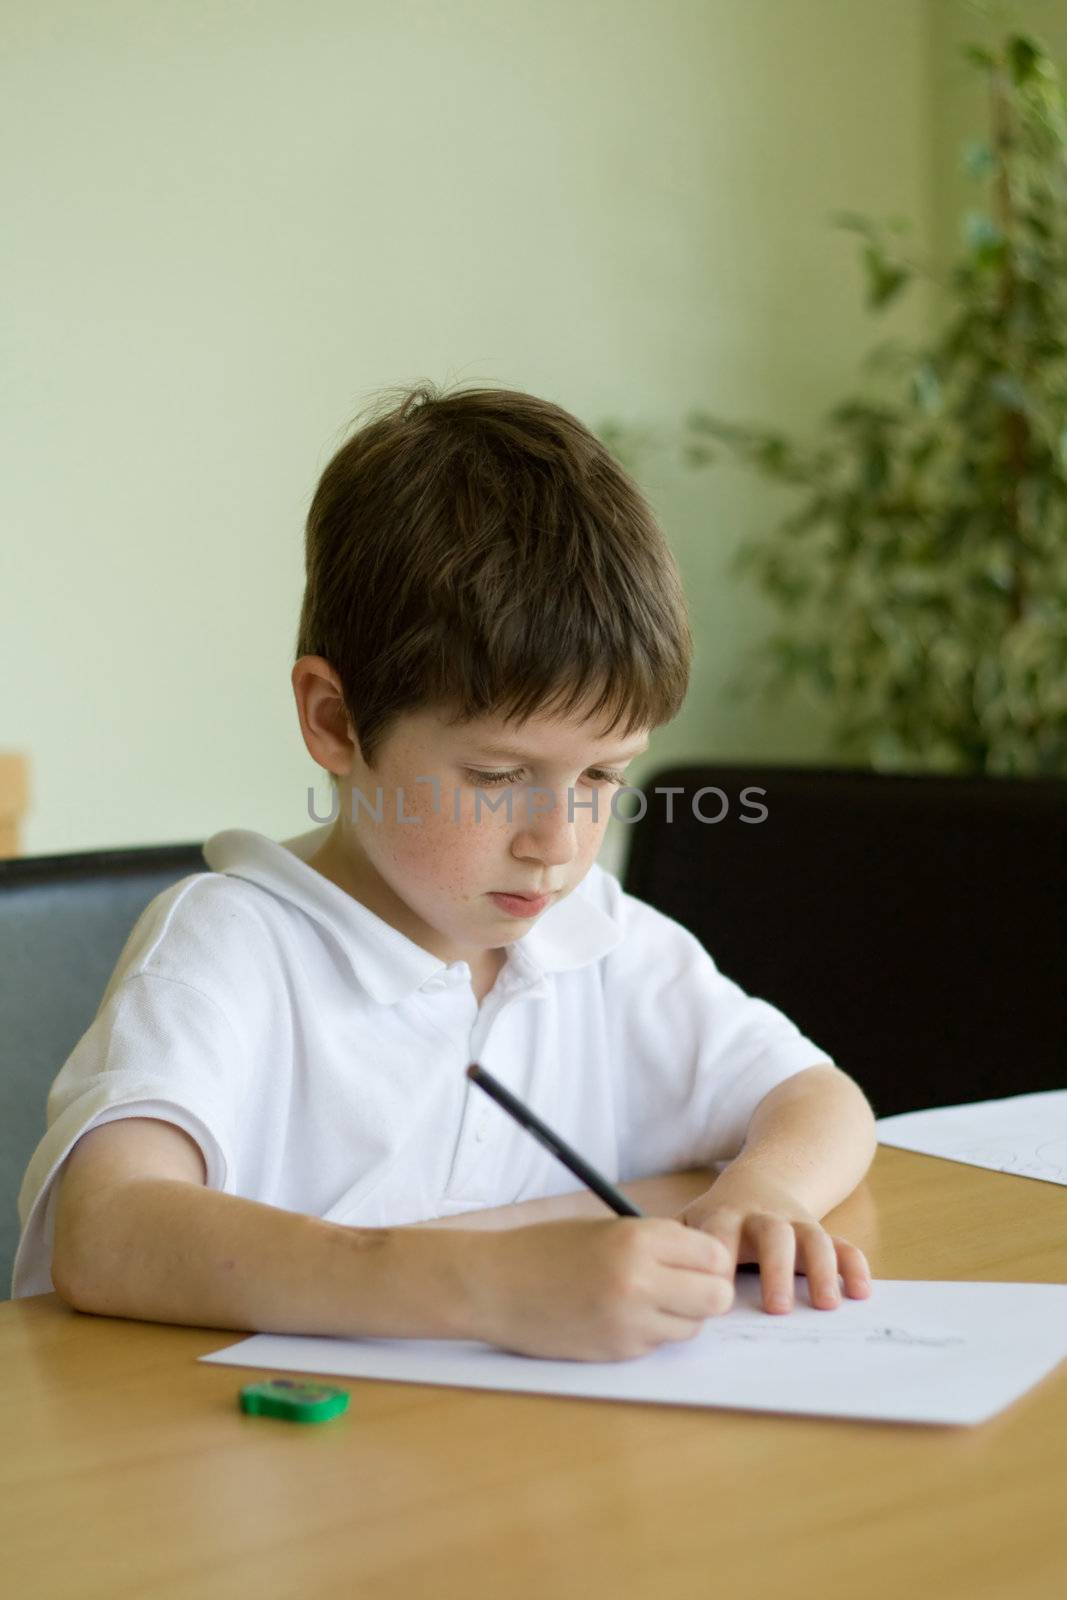 Boy at a table doing homework/drawing